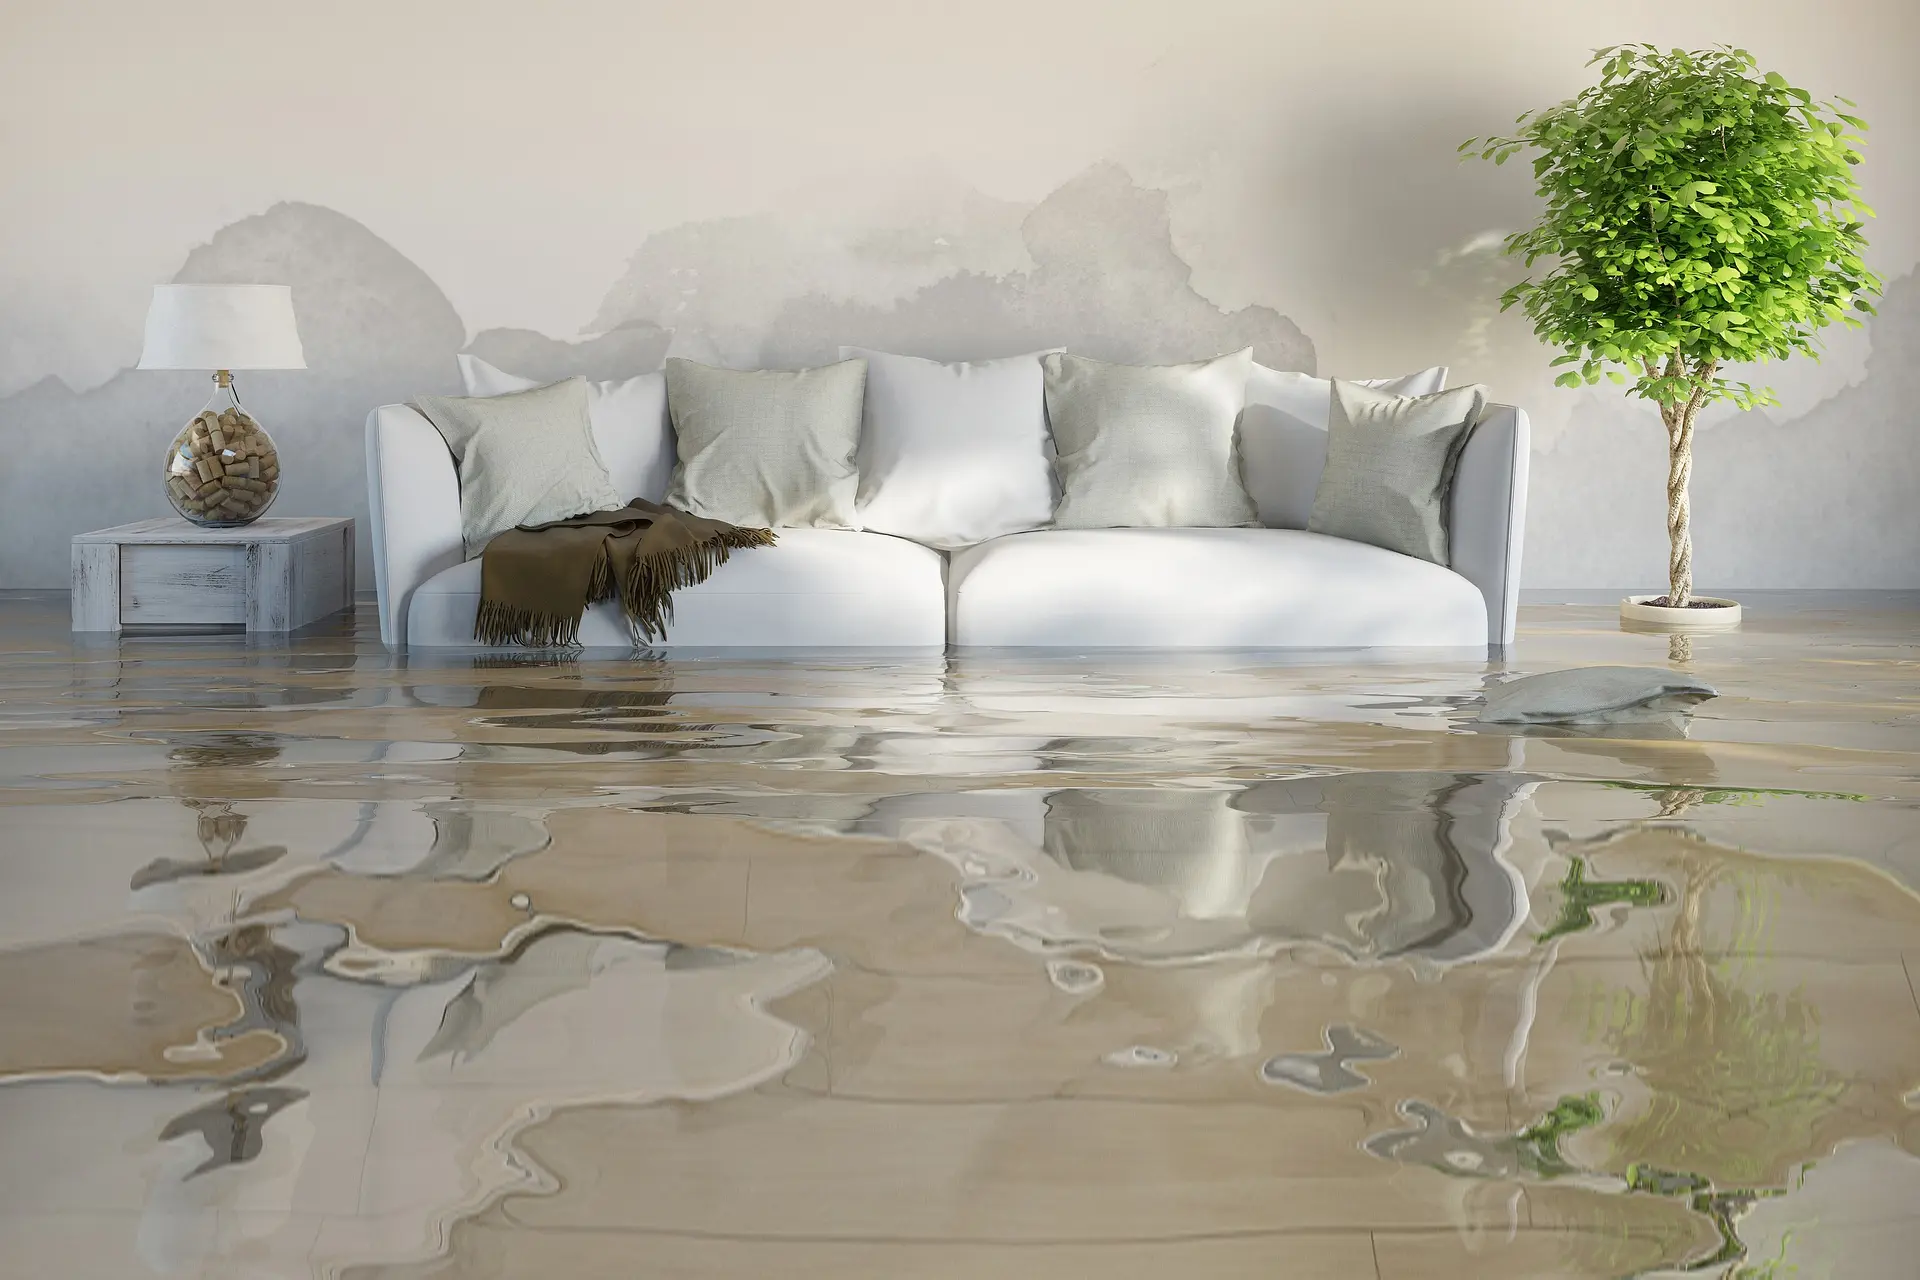 How to Handle Water Damage Emergencies: Professional Restoration Services in Goodyear Arizona